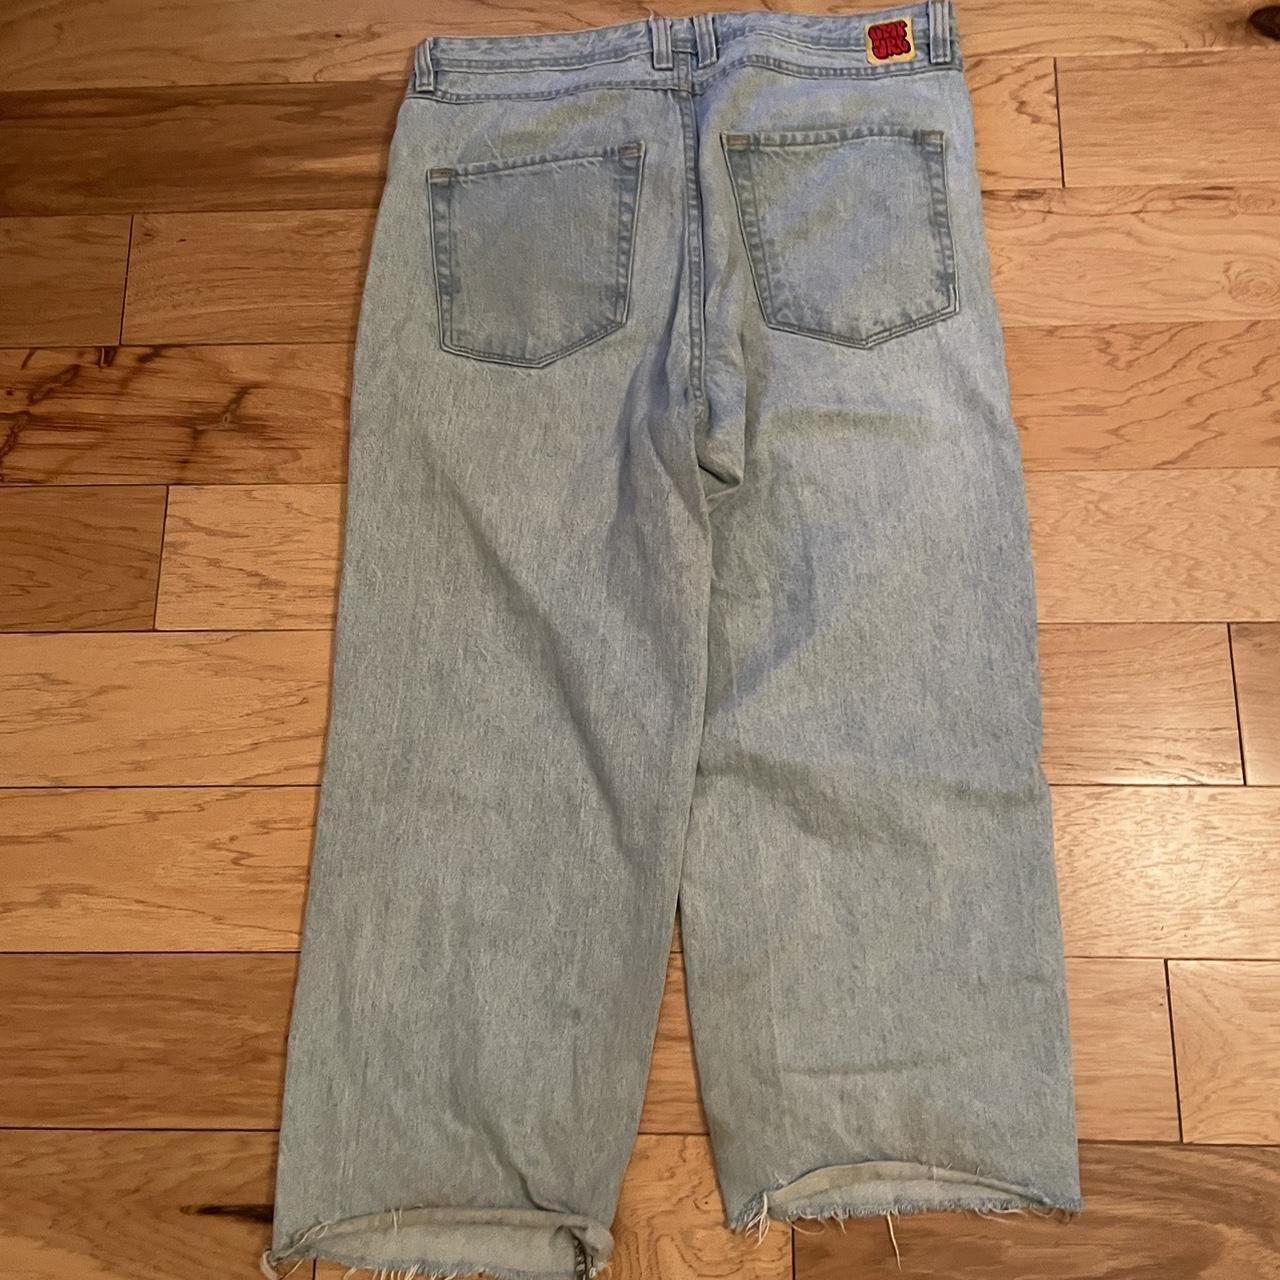 BAGGY EMPYRE LIGHT WASH JEANS SMALL COFEE STAIN NO... - Depop